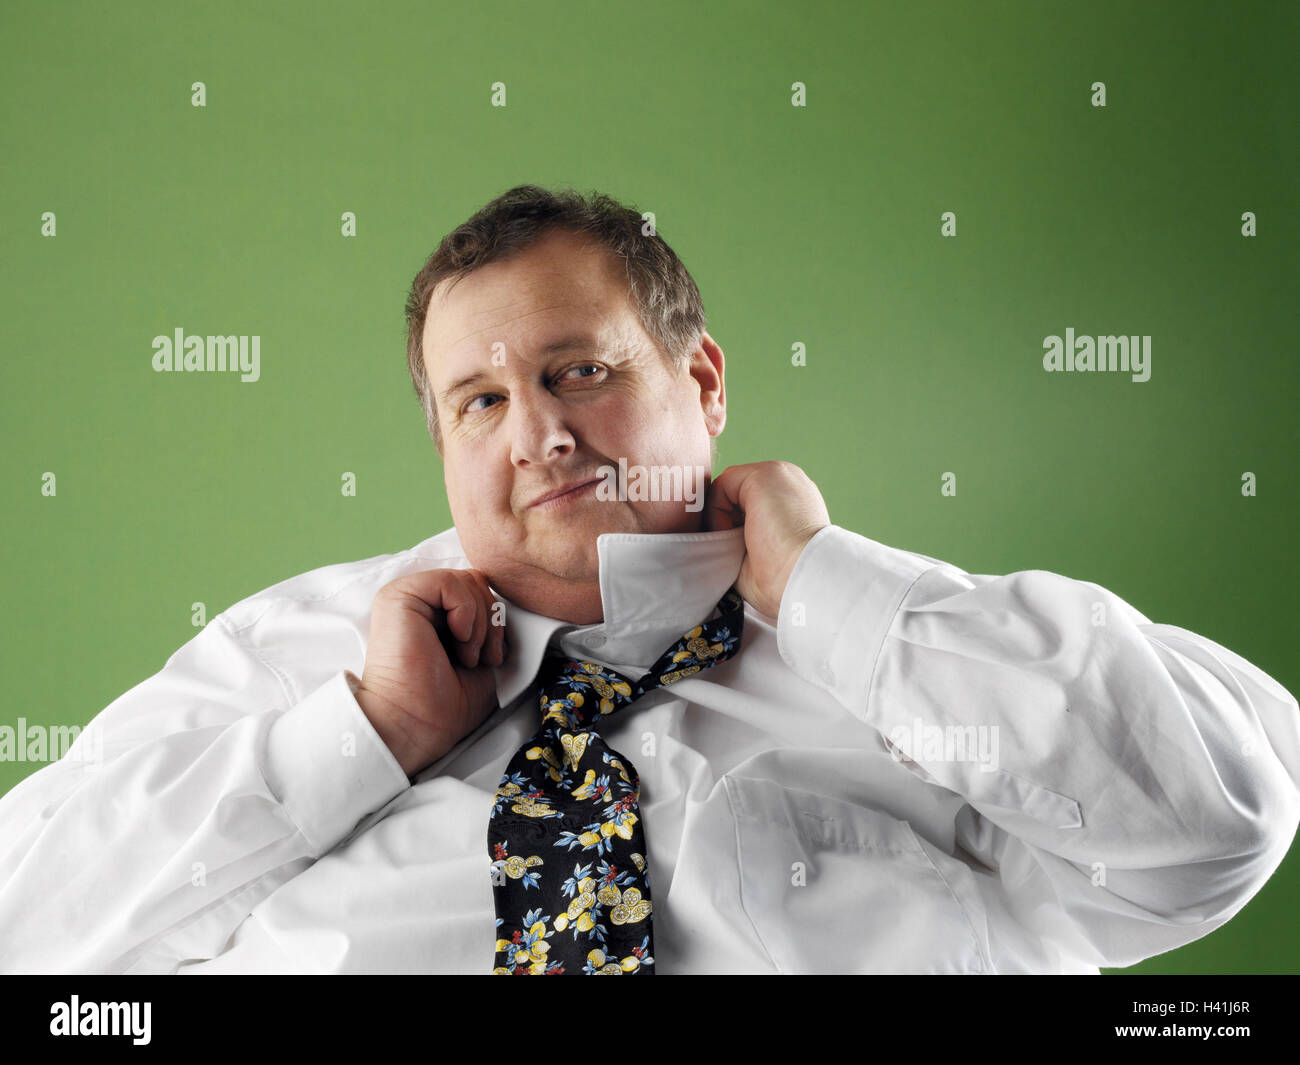 Man, overweight, dress, shirt collars, portrait, middle old person, thickly, bold, overweight, fatly, adiposity, obesity, obesity, perimetre, voluminously, body perimetre, body weight, unhealthily, shirt, shirt, draw, collars, straighten, tie, tie, studio Stock Photo